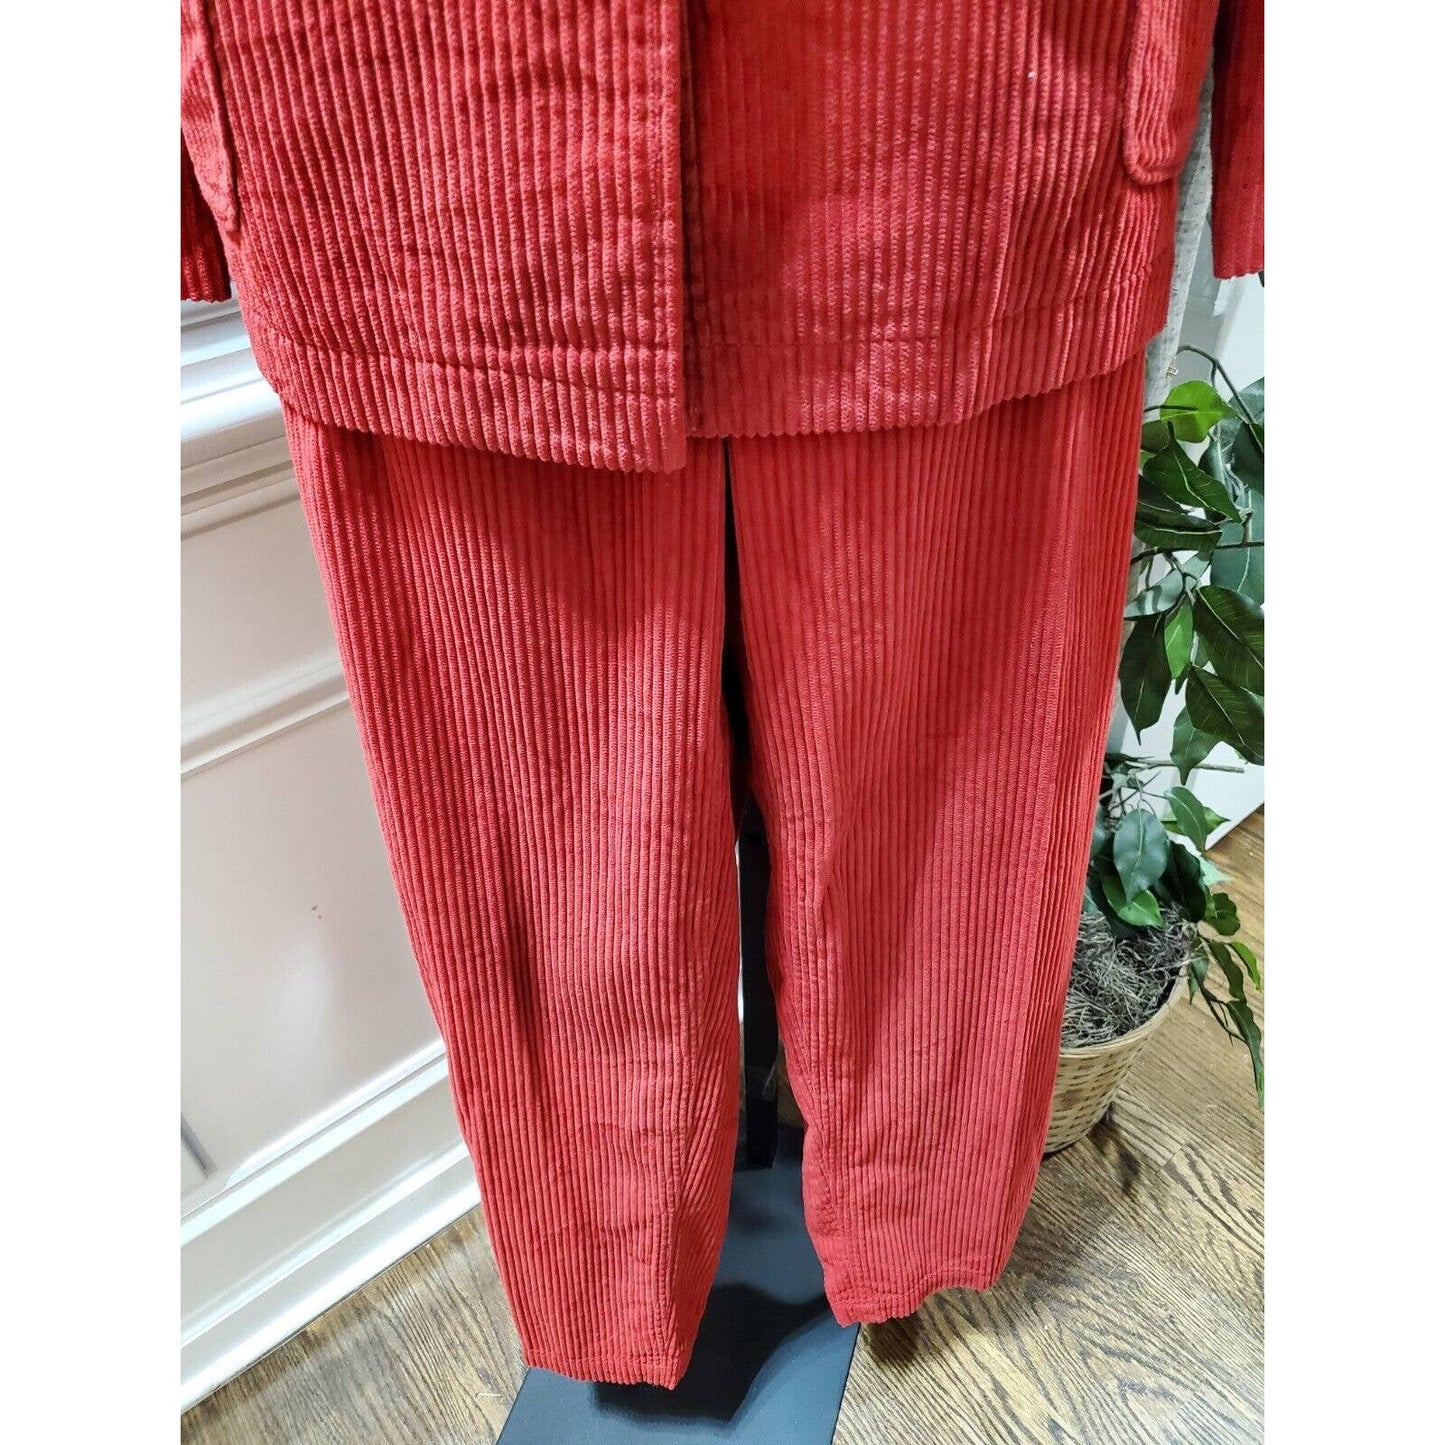 Corduroy David Brooks Red Cotton Single Breasted Jacket & Pant 2 Piece Suit 16